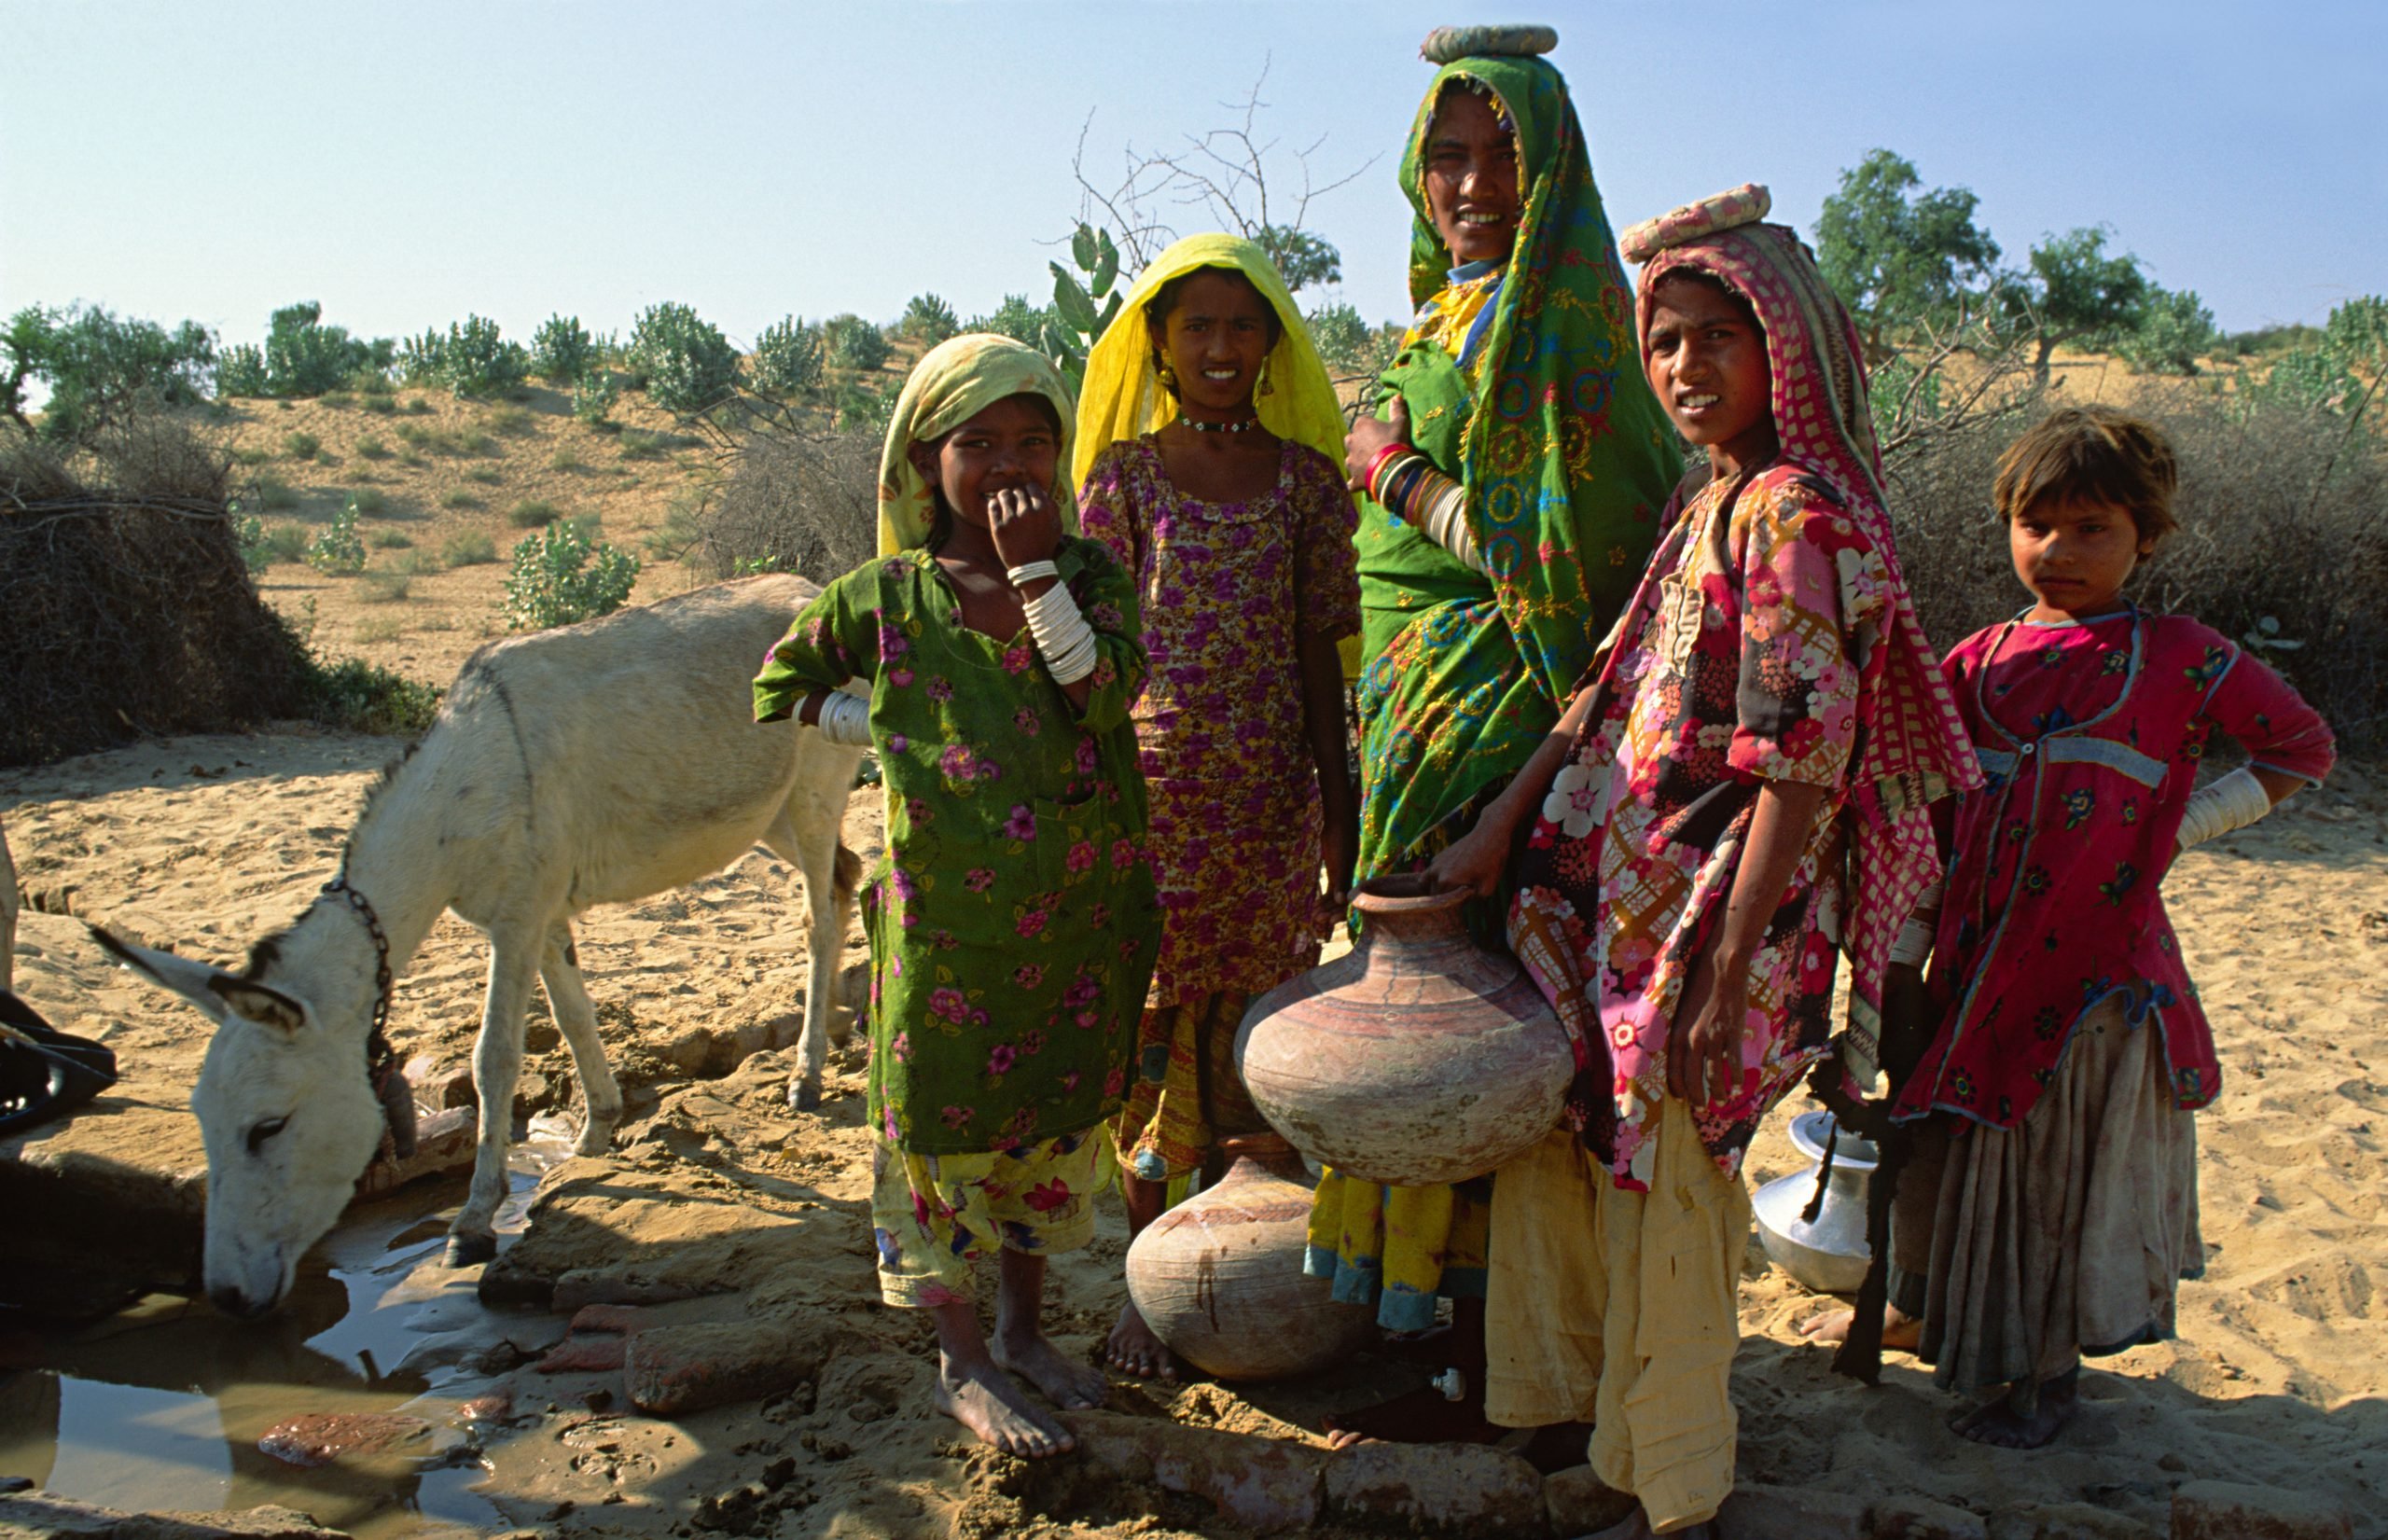 Mother and daughters collecting water from the village well in the arid region of Thar desert, Pakistan Sindh province.